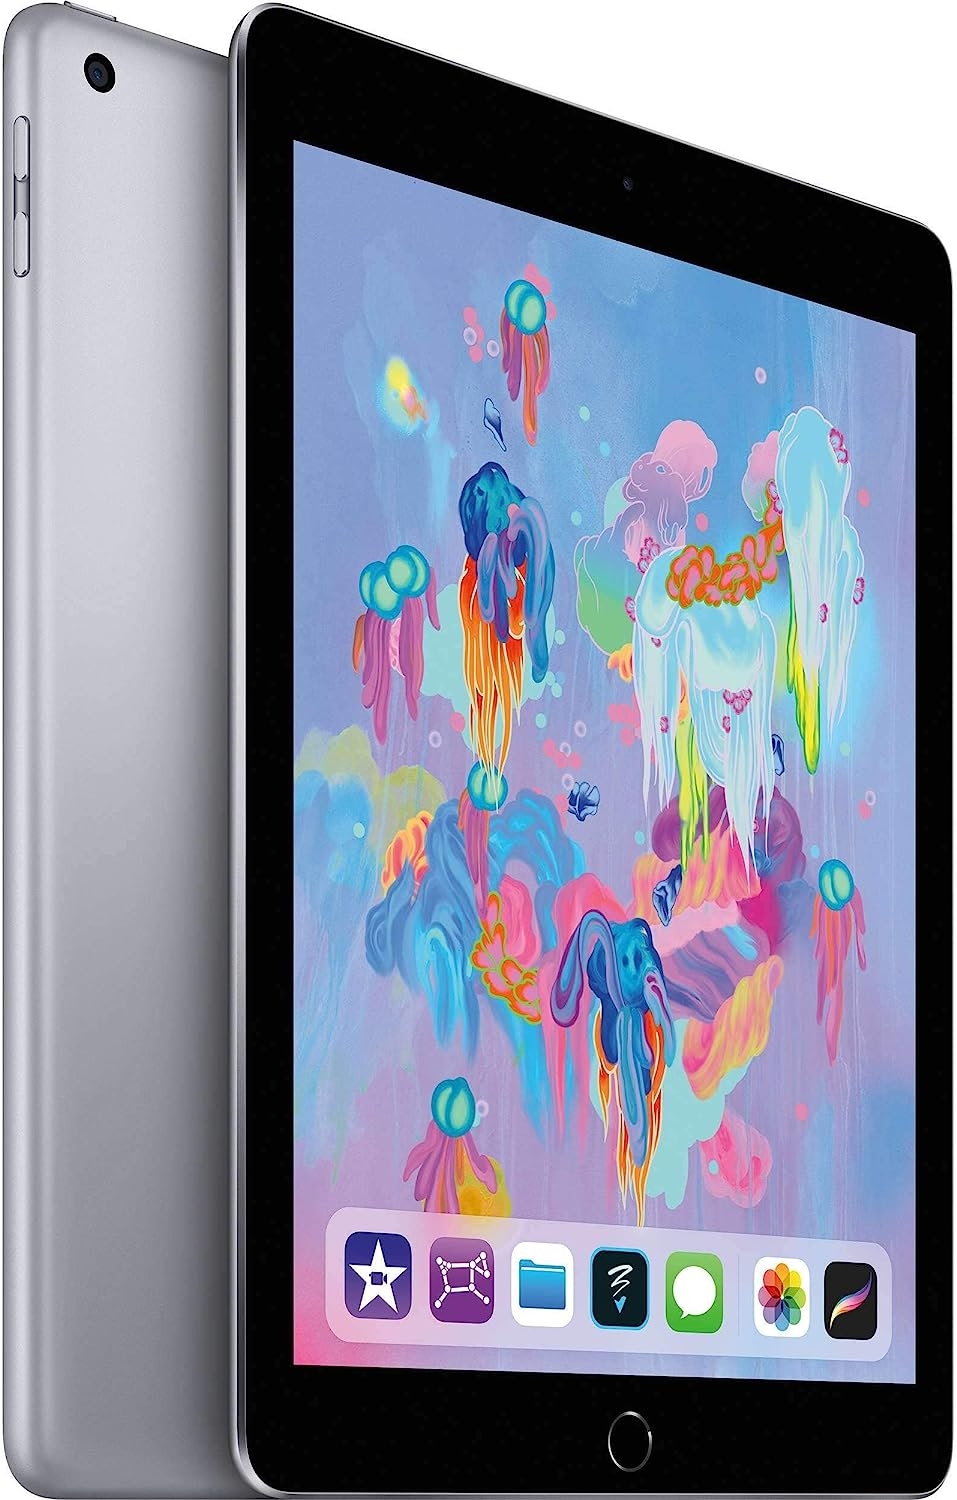 Apple 9.7-inch iPad (Early 2018, 32GB, Wi-Fi Only, Space Gray) MR7F2LL/A (Renewed)   price checker   price checker Description